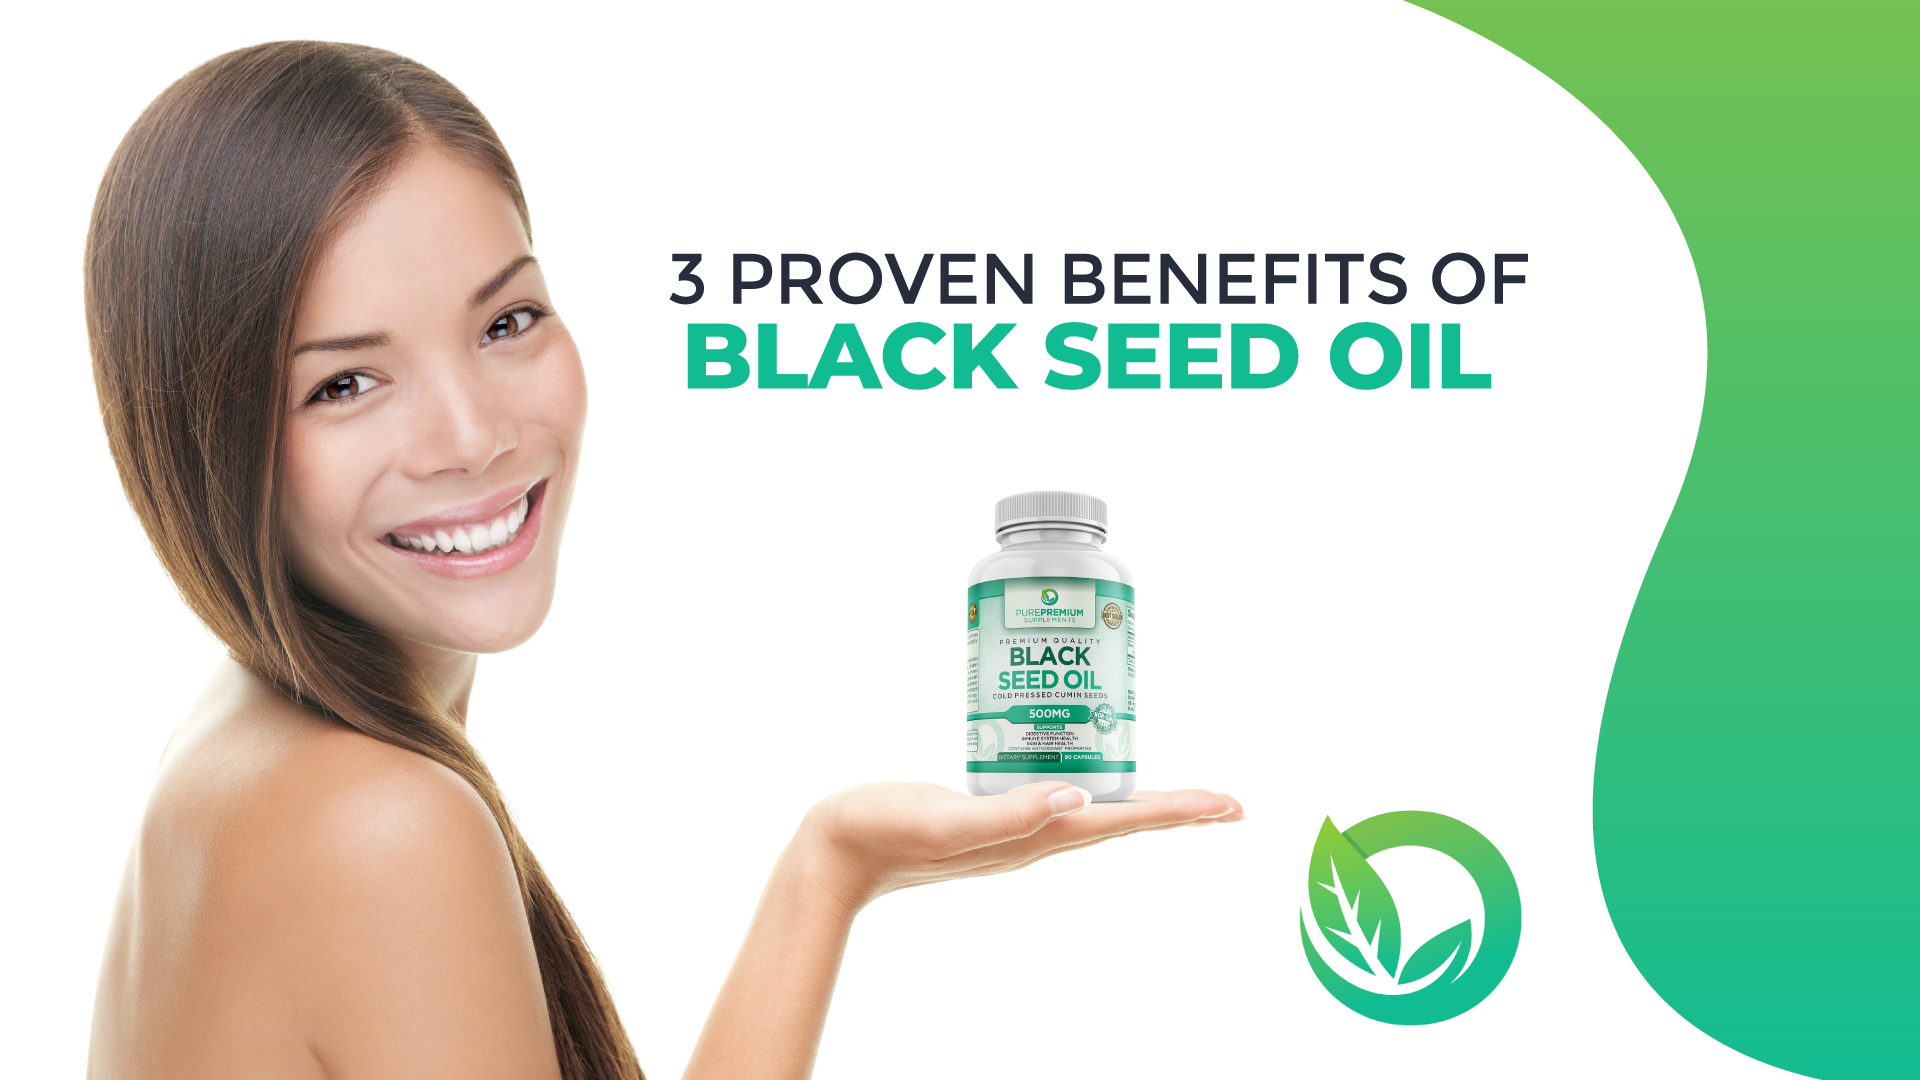 3 Proven Benefits of Black Seed Oil